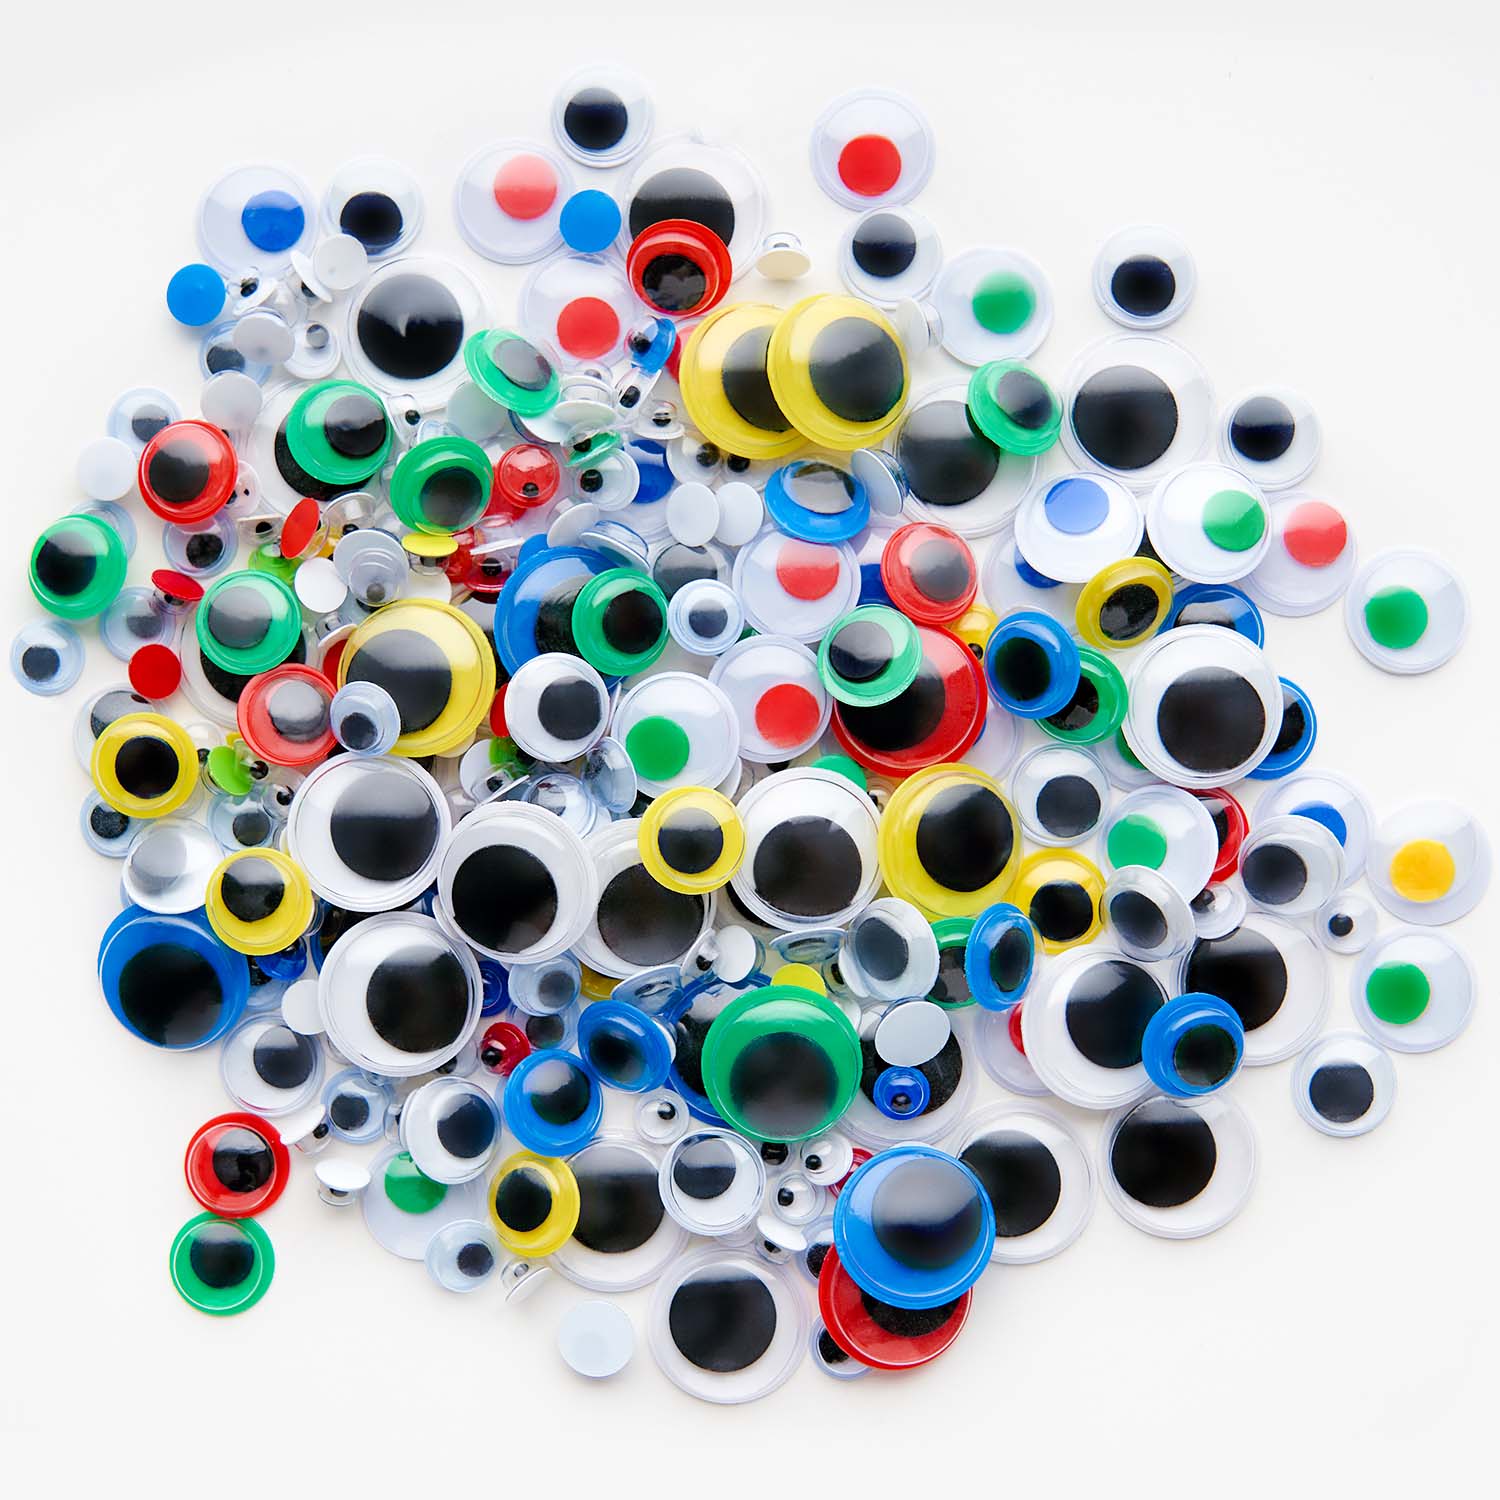 Googly Eyes, Assorted Sizes & Colors - Set of 3000 Pieces | Arteza